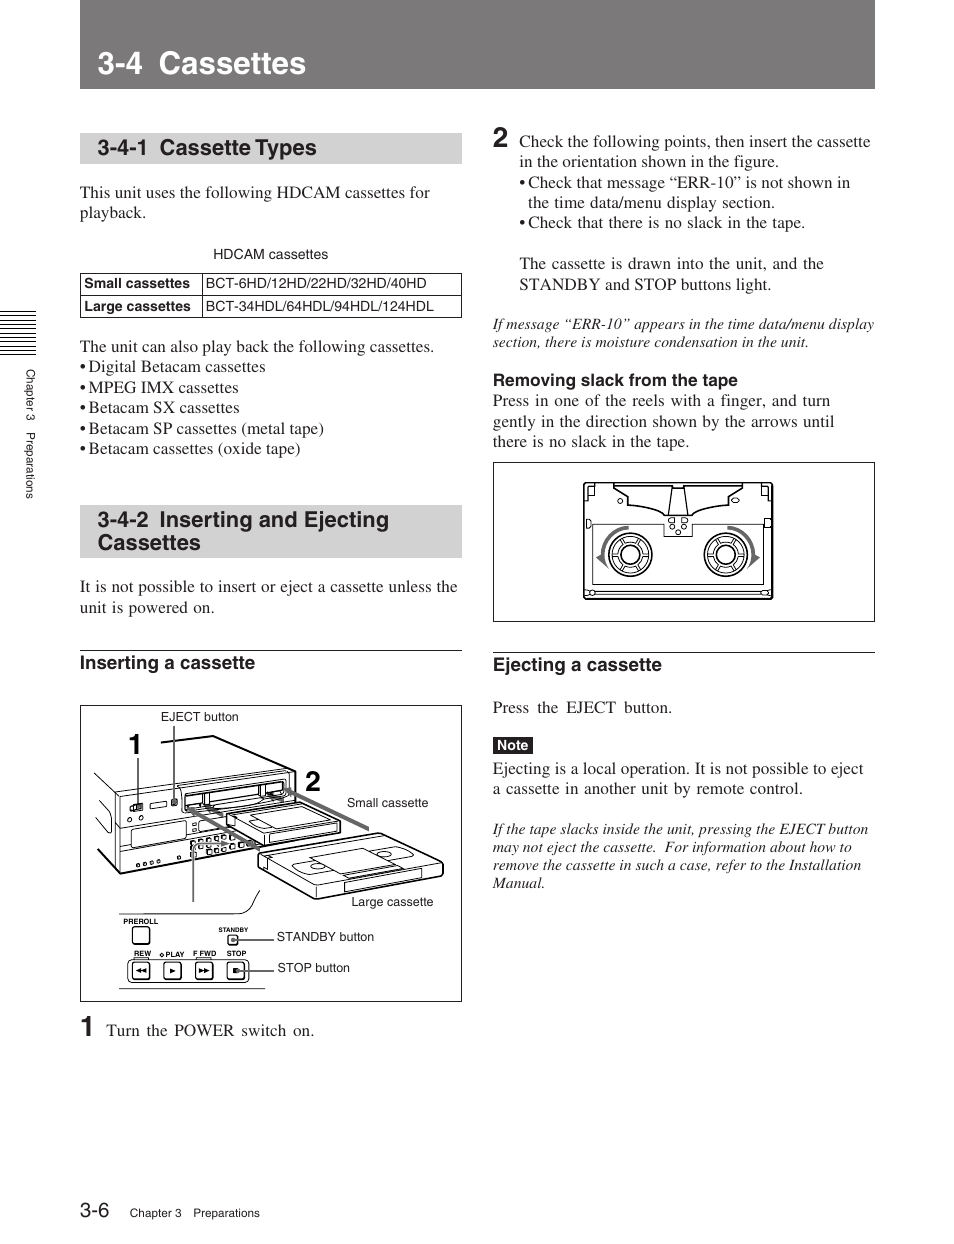 4 cassettes, 4-1 cassette types, 4-2 inserting and ejecting cassettes | Sony HDW-M2100 User Manual | Page 30 / 115